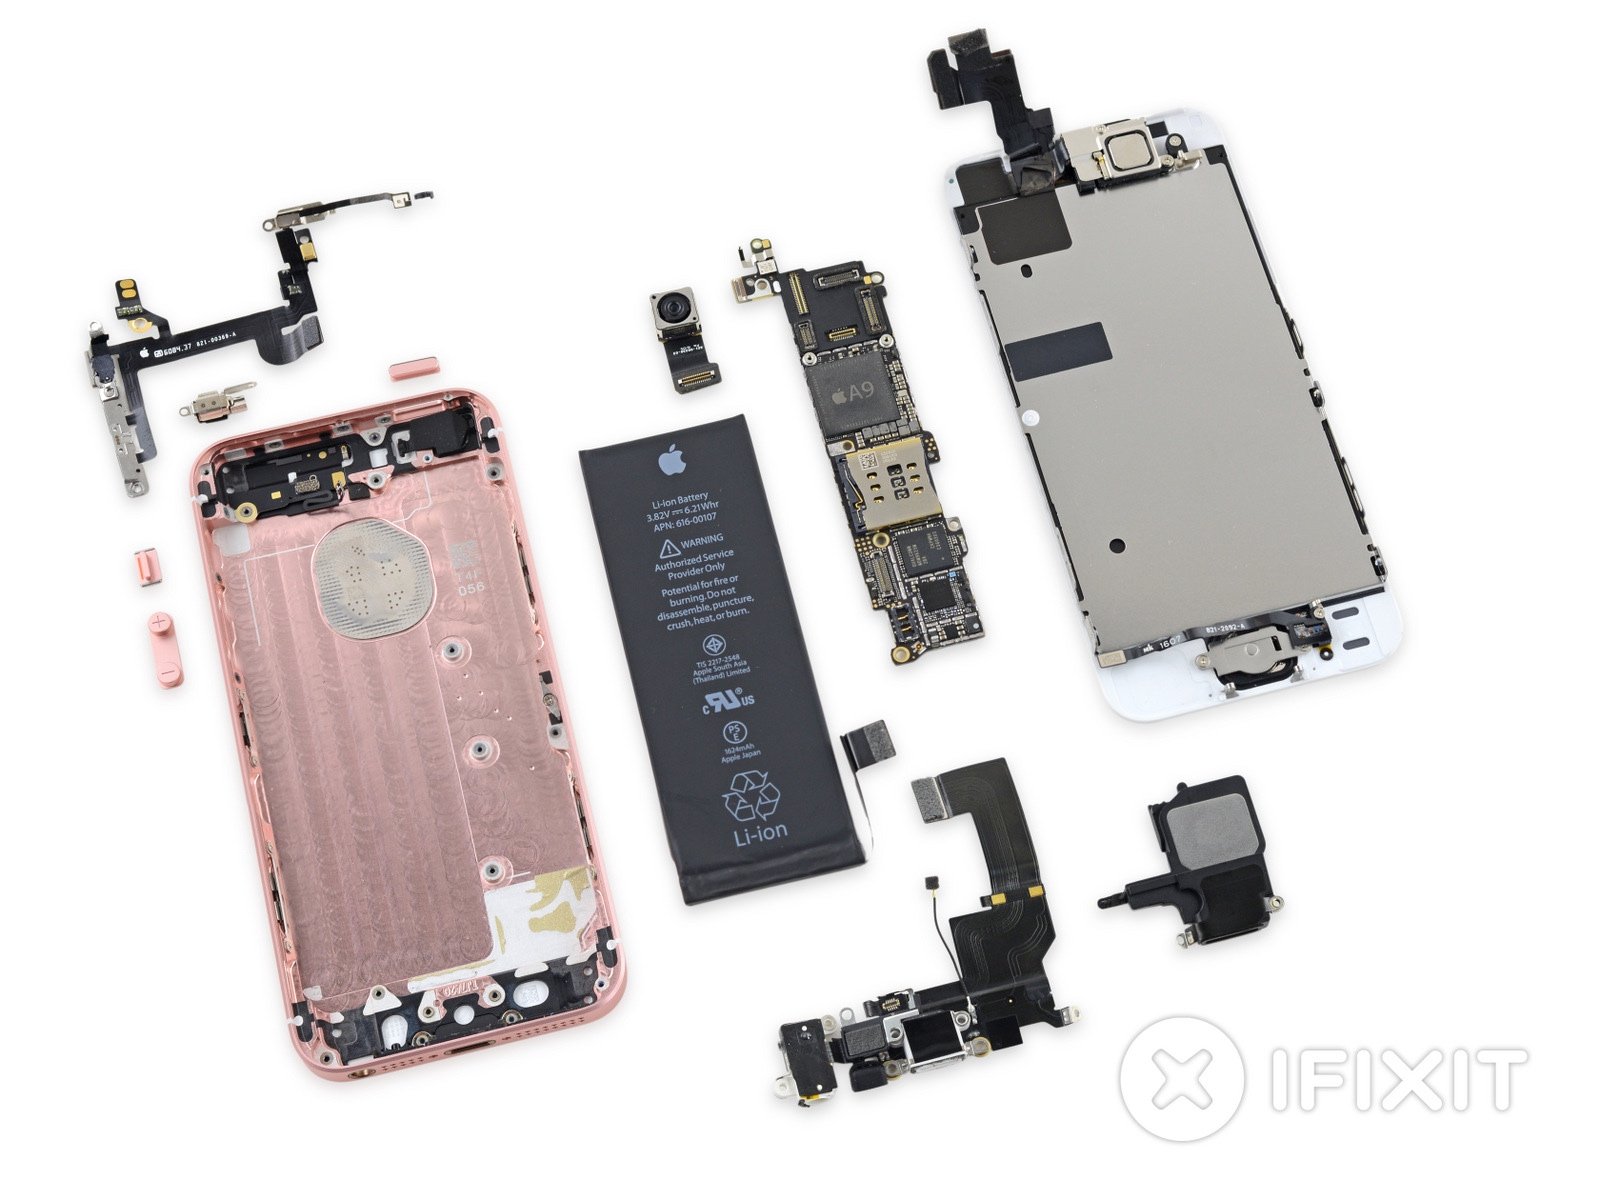 iPhone disassembled